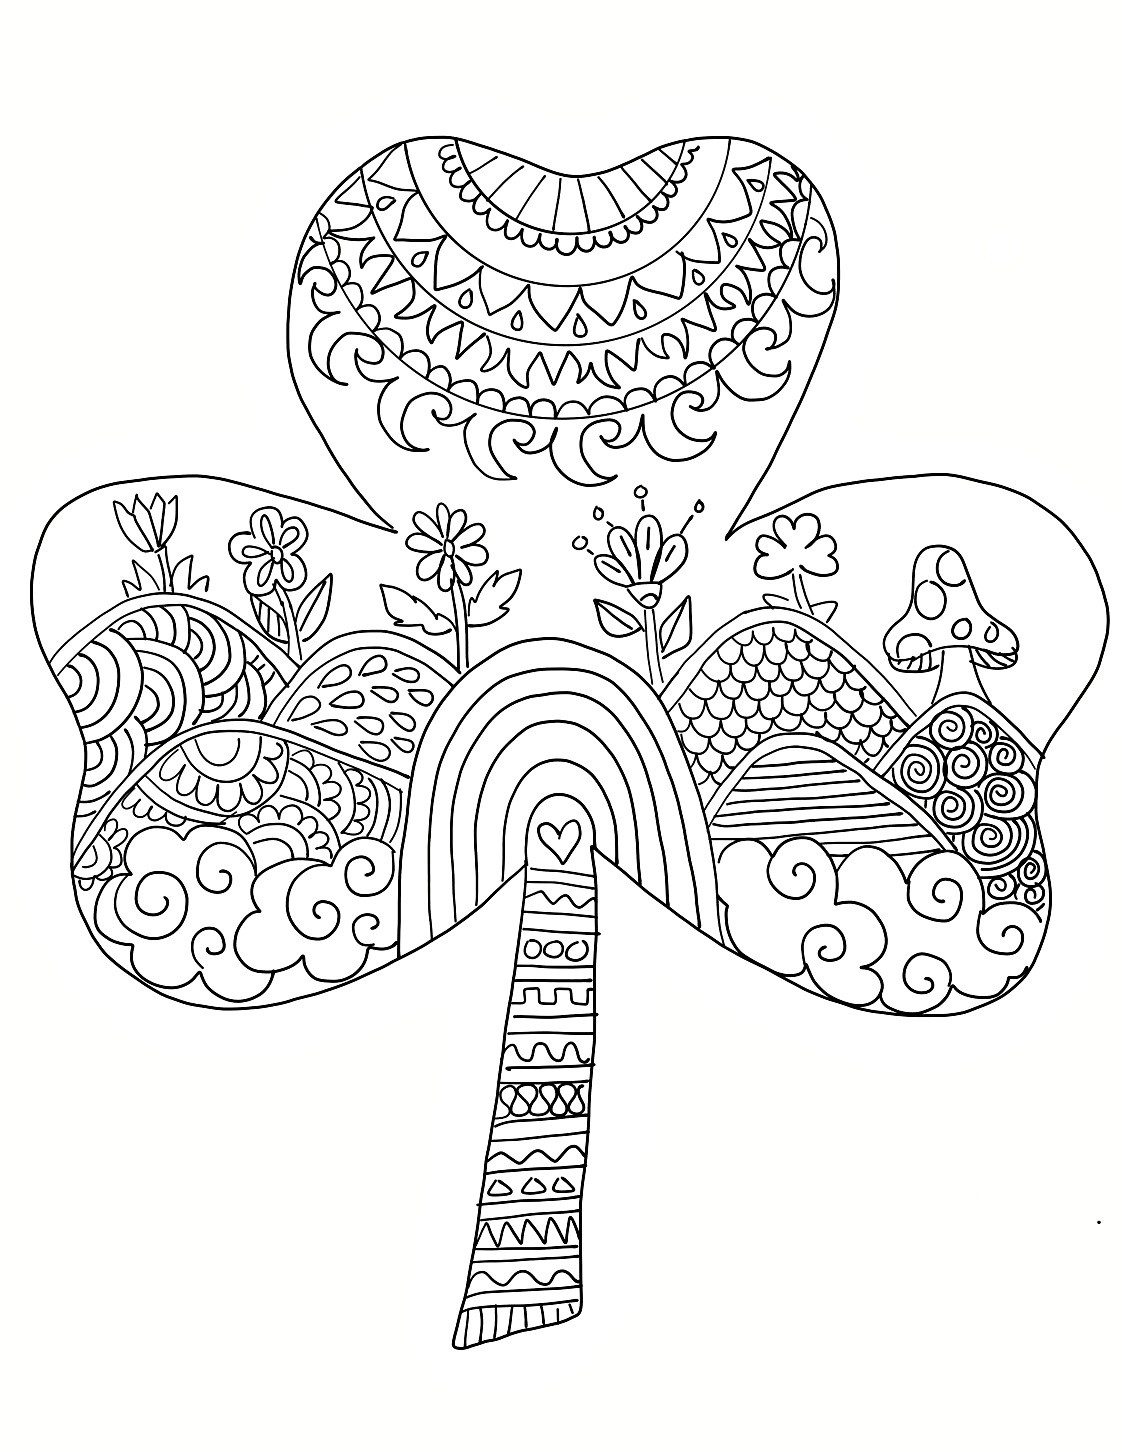 St Patrick'S Day Disney Coloring Sheets For Girls
 Cool Shamrock Mandala Coloring Page Coloring Pages – Free